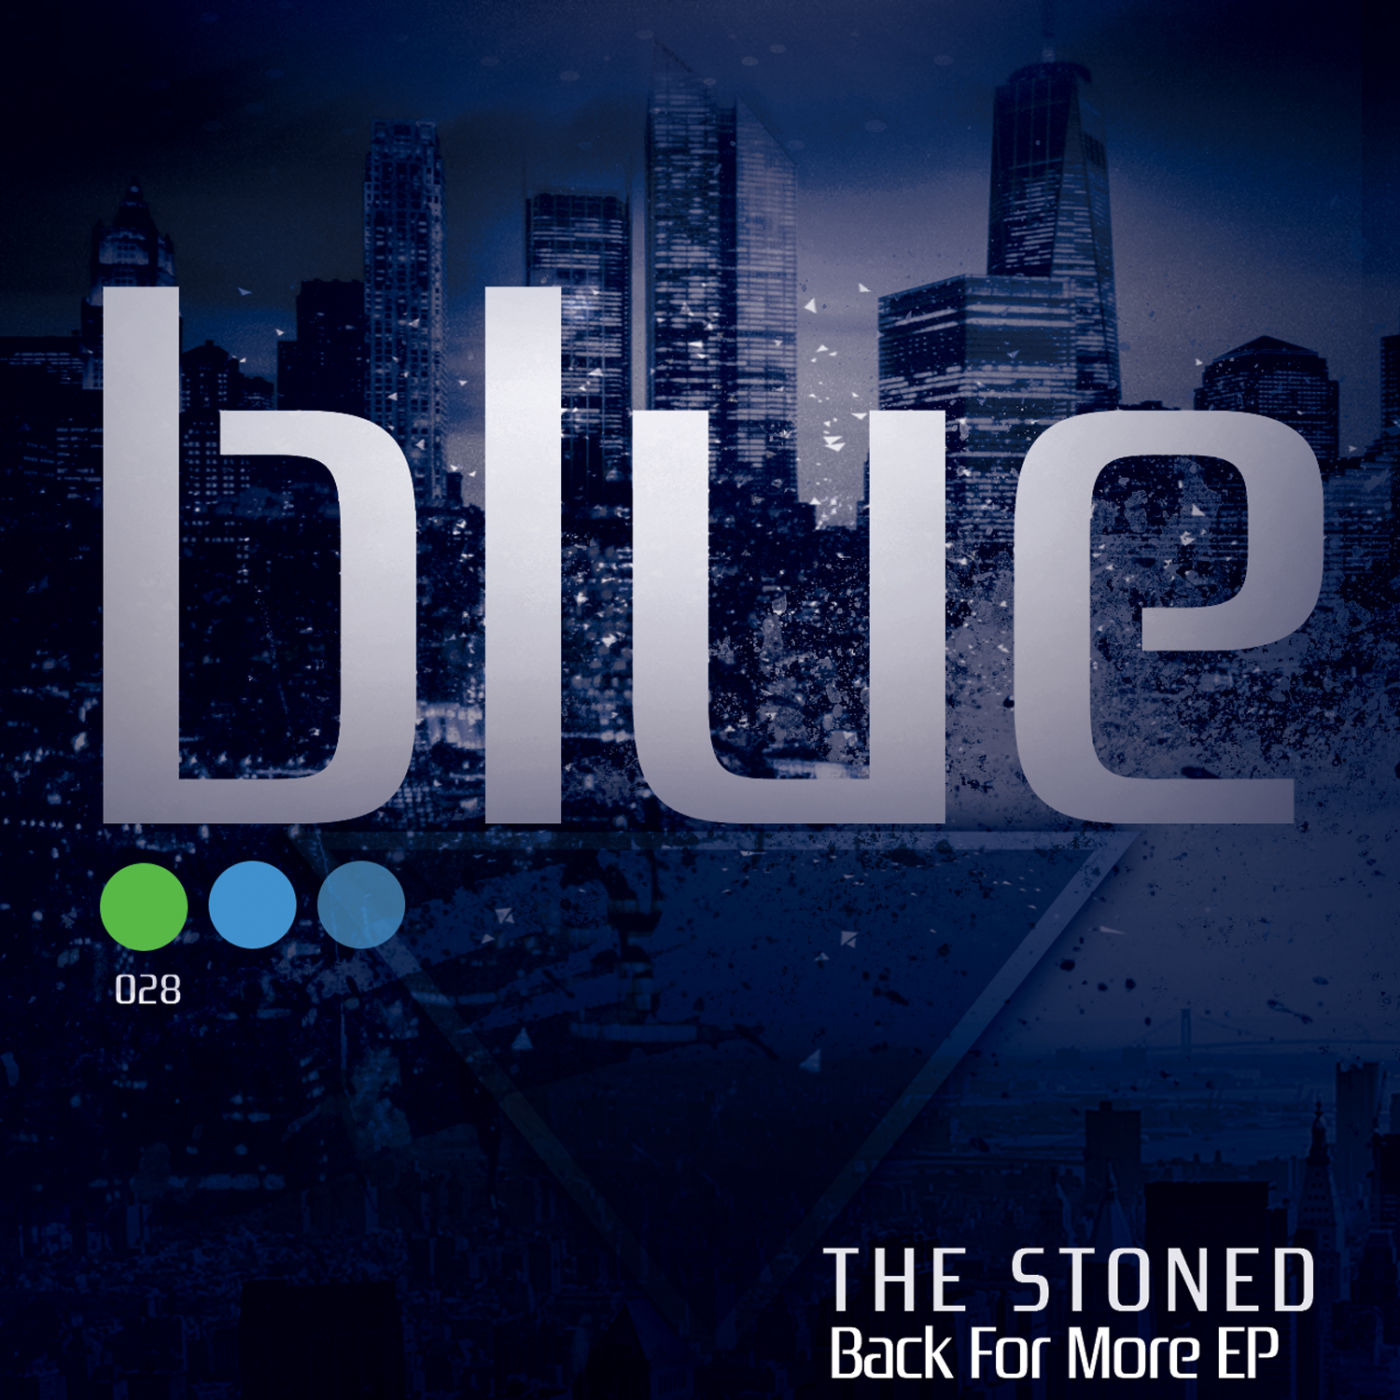 The Stoned - Back For More EP / Blue